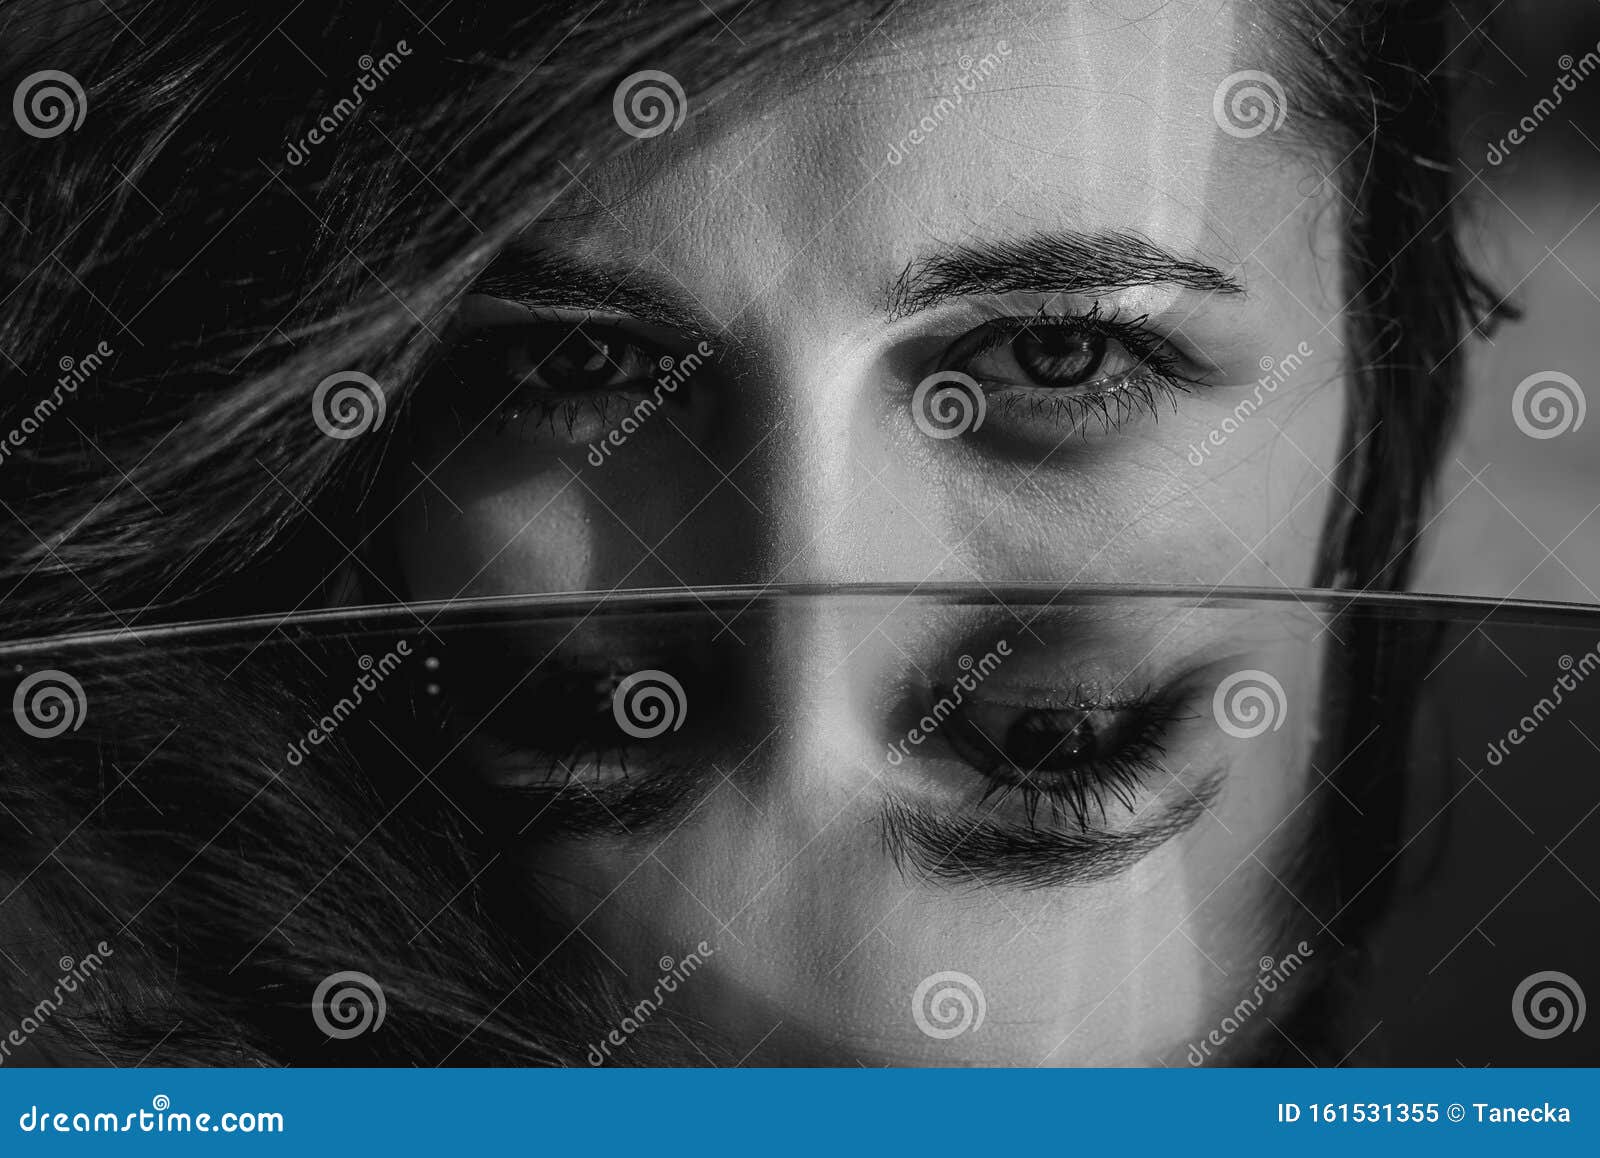 woman eyes closeup reflected in mirror. hypnotize strong look. hypnotic deeply penetrating glance. revengeful insidious expectant